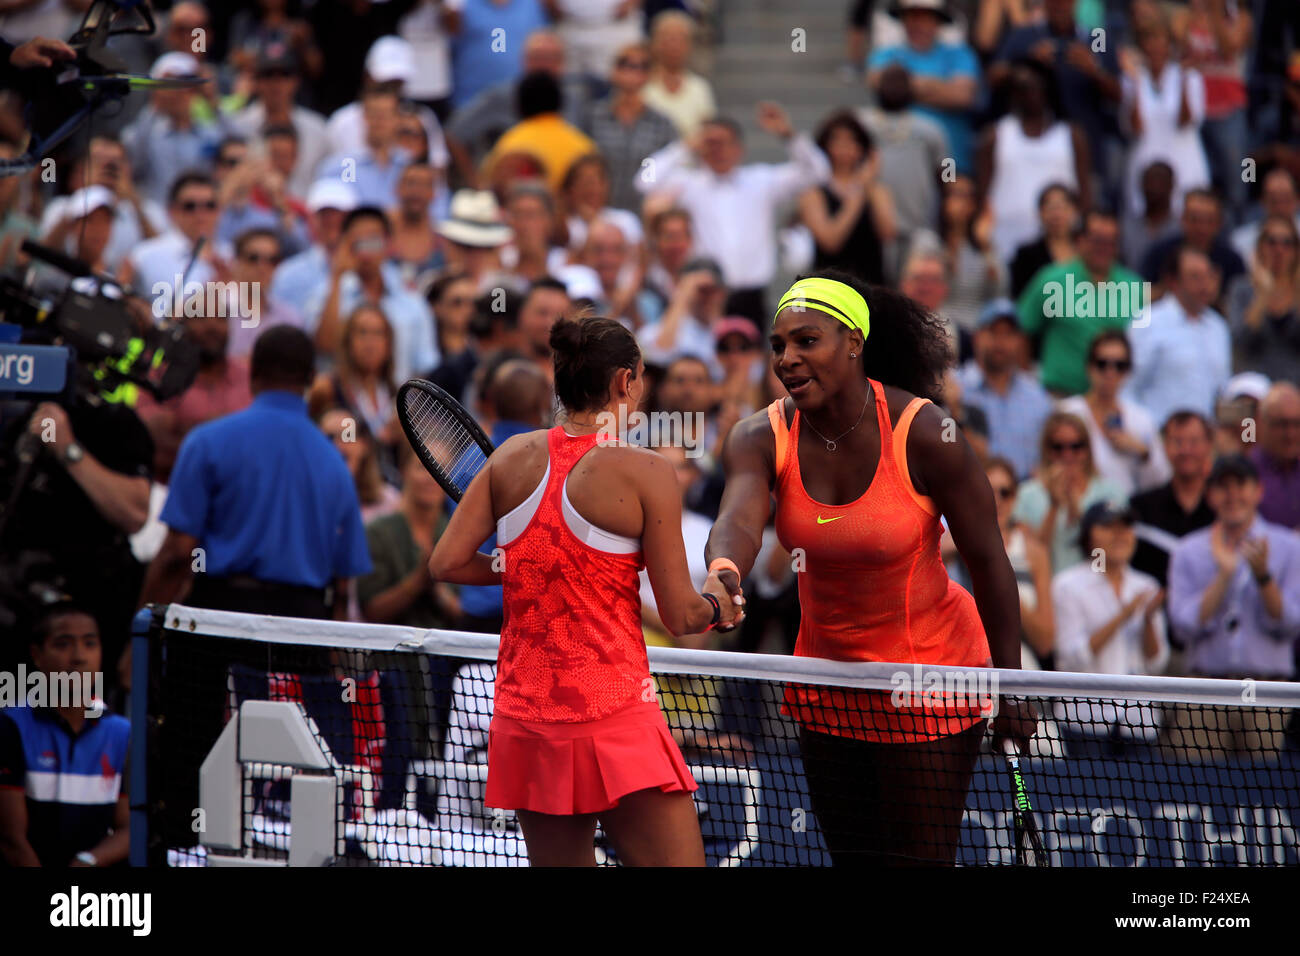 Flushings Meadow, New York, USA. 11th Sep, 2015. Roberta Vinci of Italy shakes hands with Serena Williams after defeating Williams in their semifinal match at the U.S. Open in Flushing Meadows, New York on the afternoon of September 11th, 2015. Vinci won the match 2-6, 6-4, 6-4. Credit:  Adam Stoltman/Alamy Live News Stock Photo